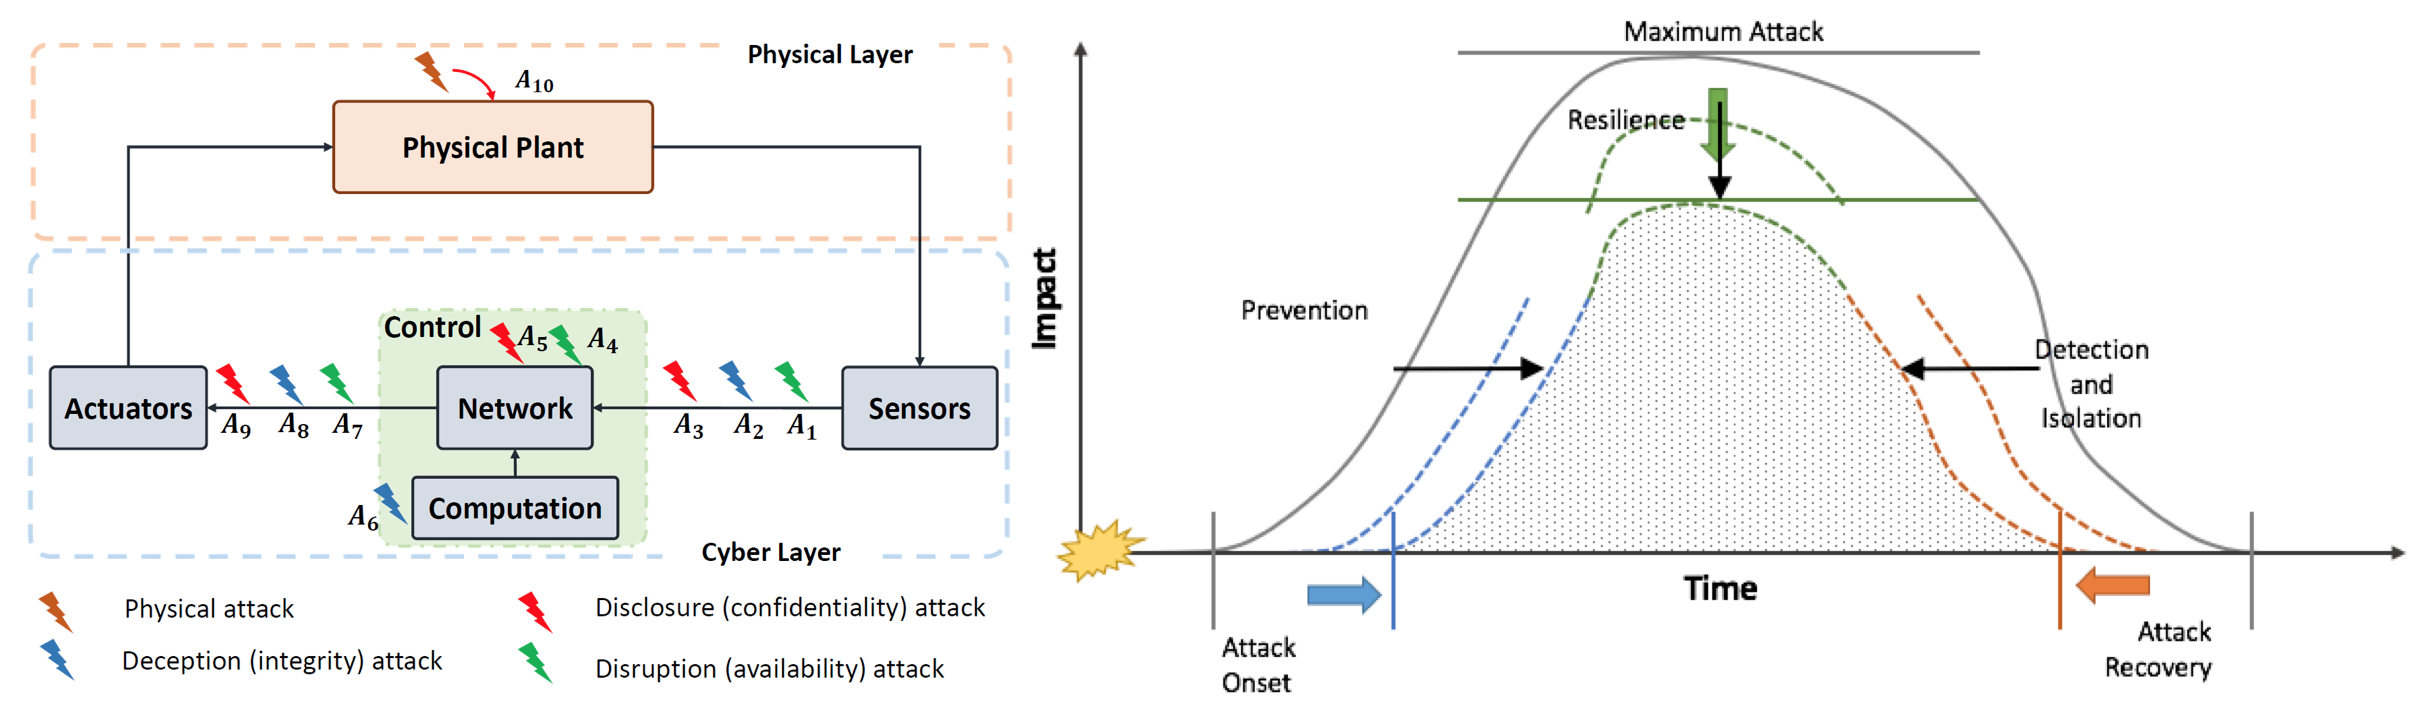 Security and Resilience Using a Control Systems Perspective